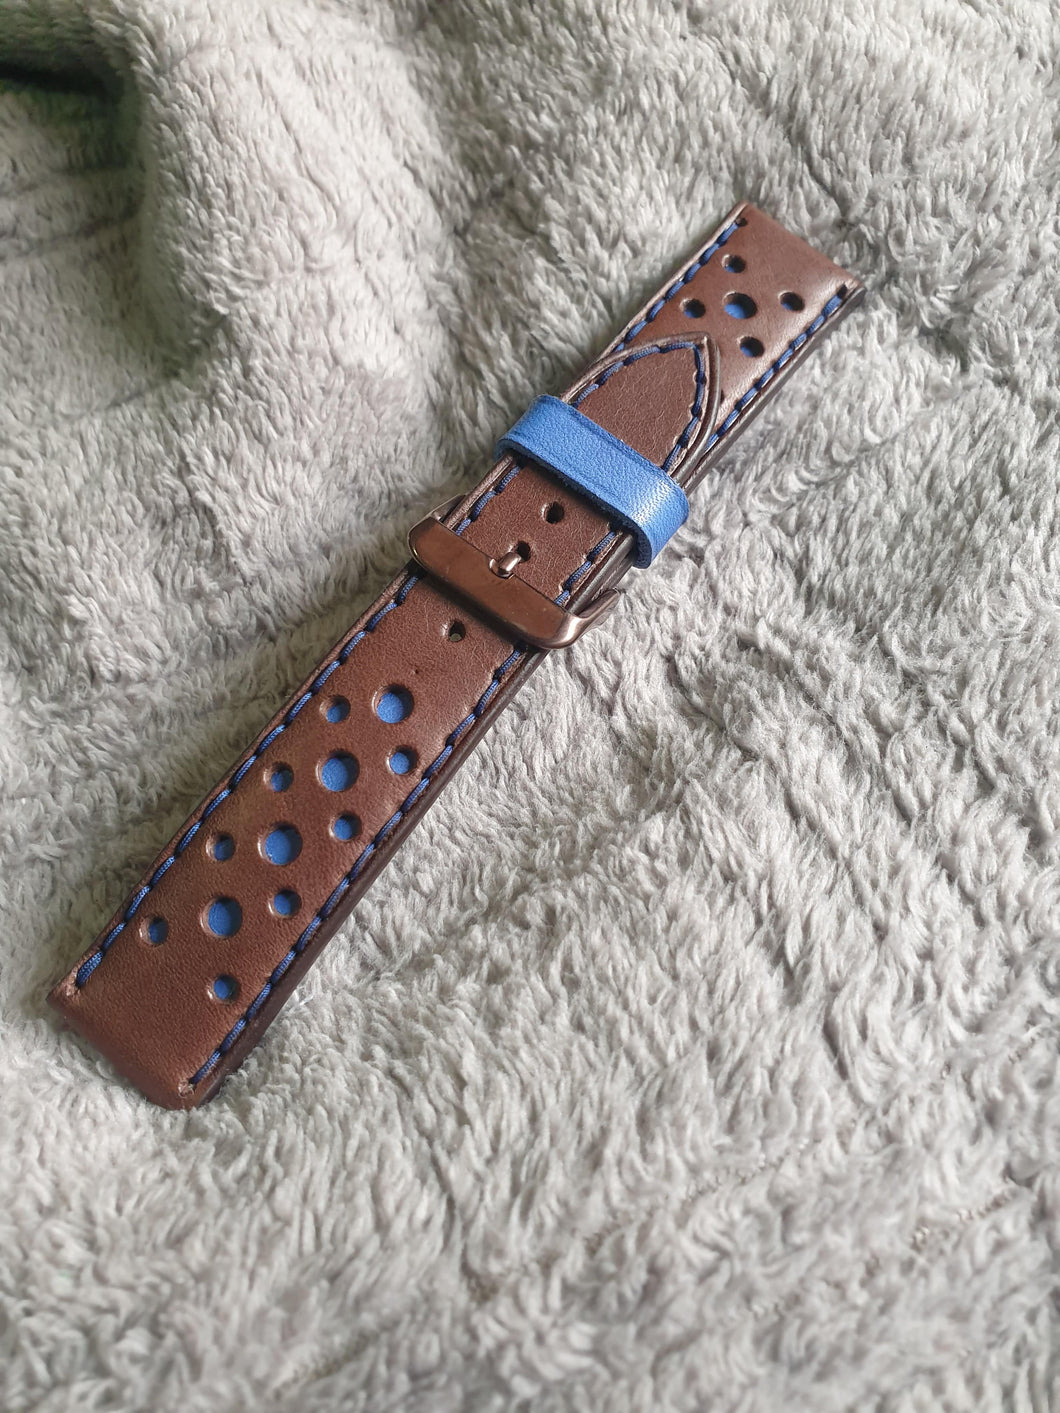 Indianleathercraft 22mm Handmade brown leather rally watch strap